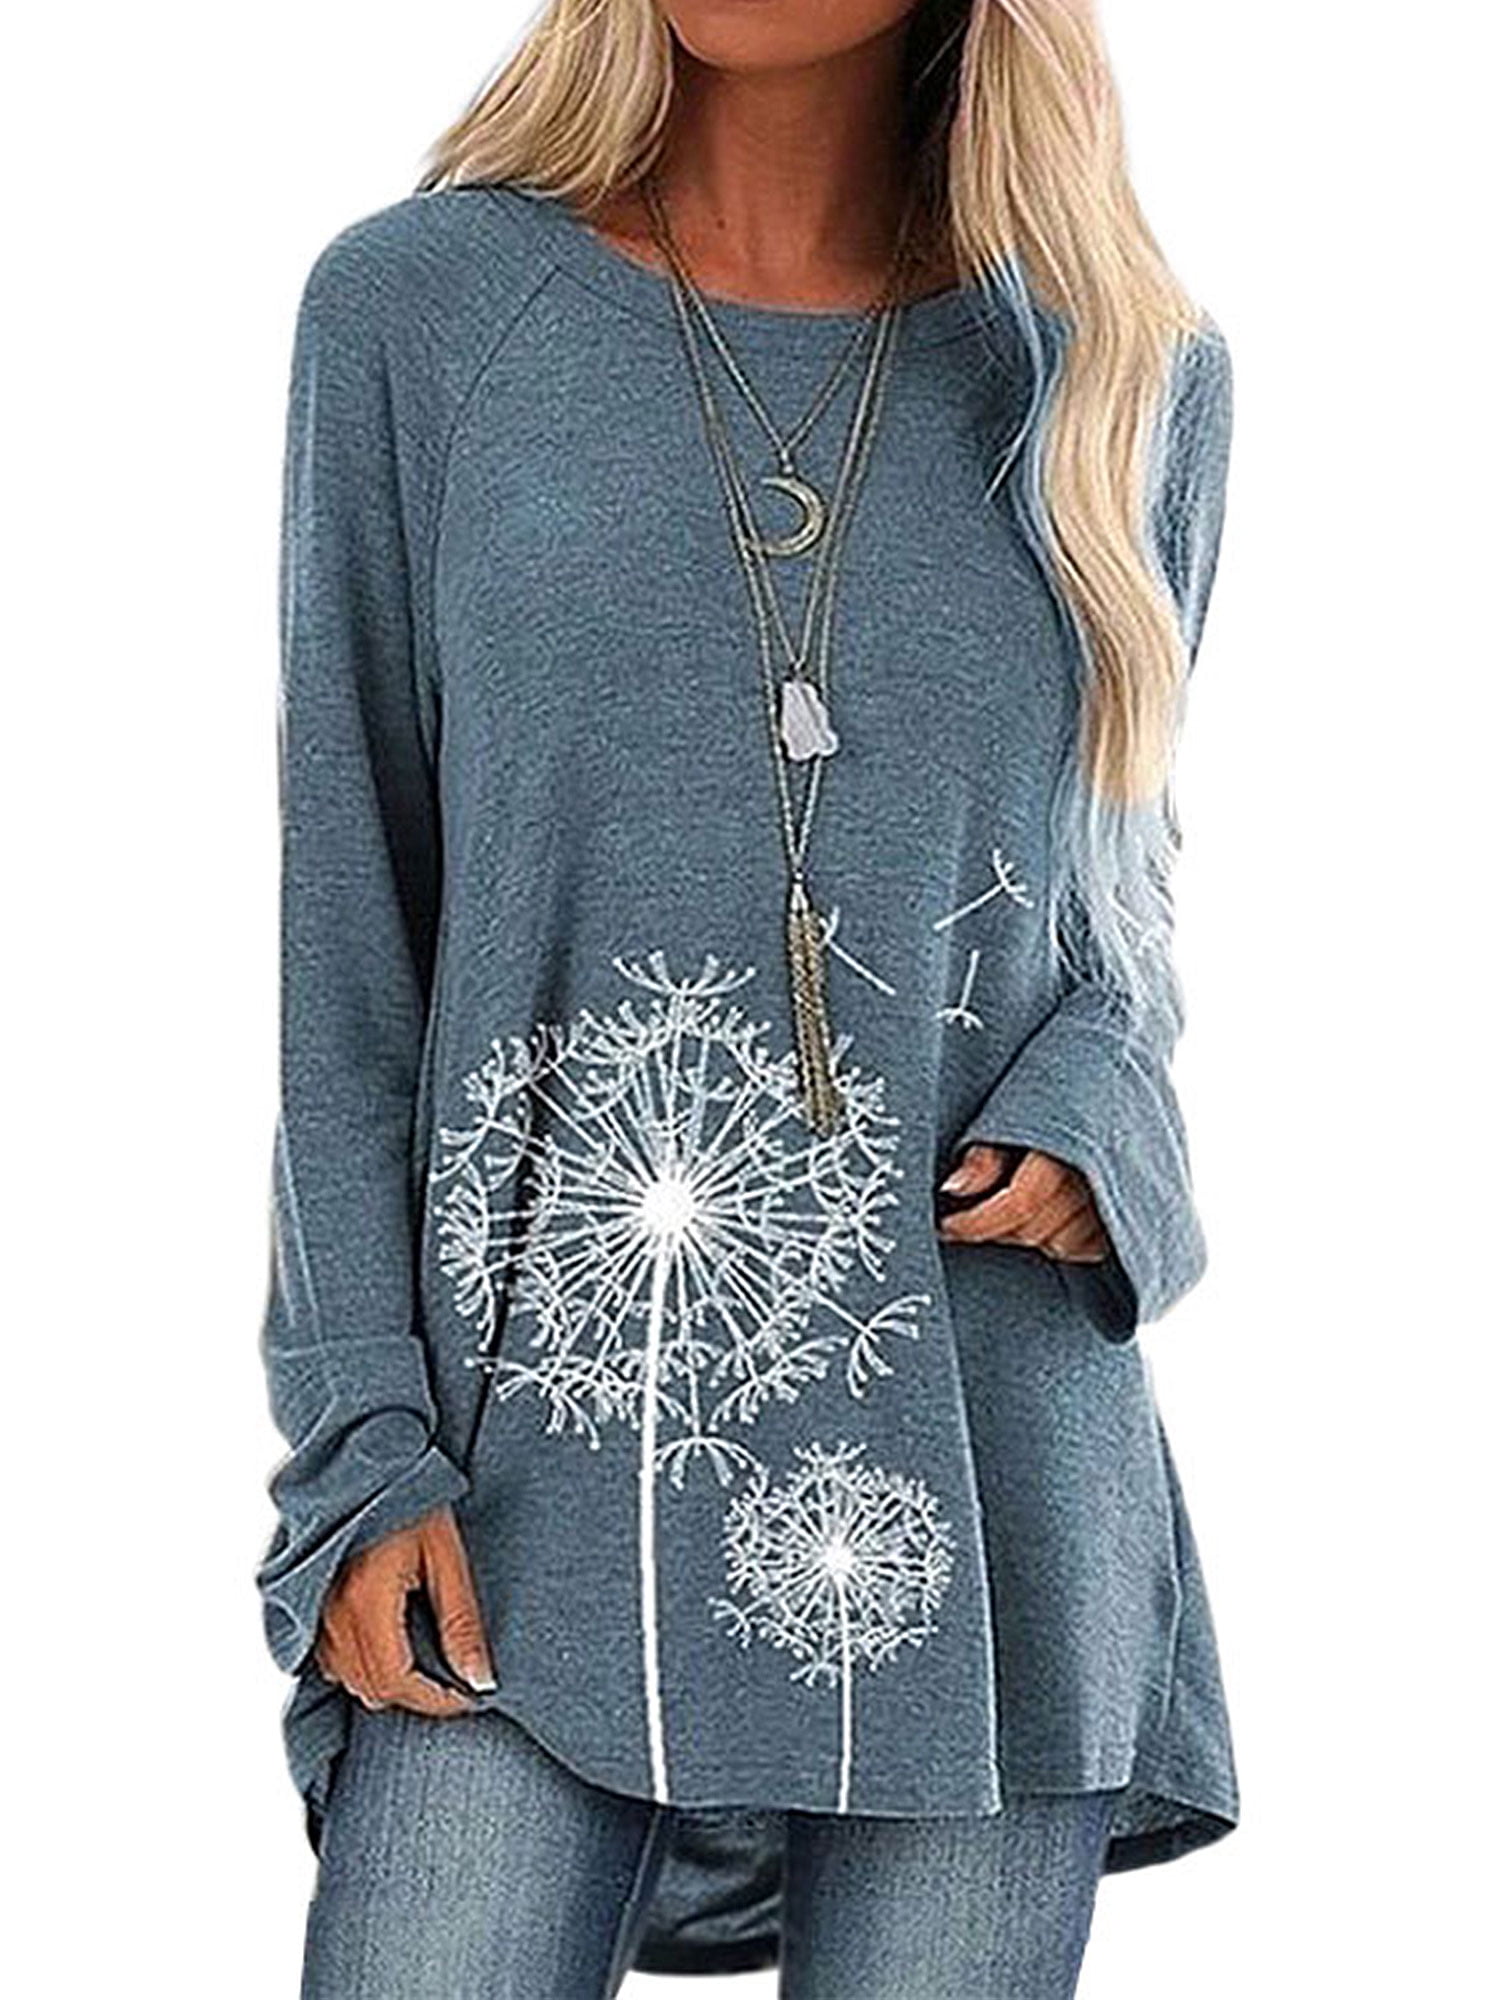 Womens Dandelion Flower Graphic Long Sleeve Tops for Autumn and Winter Trendy Thermal Casual Tee Shirts 